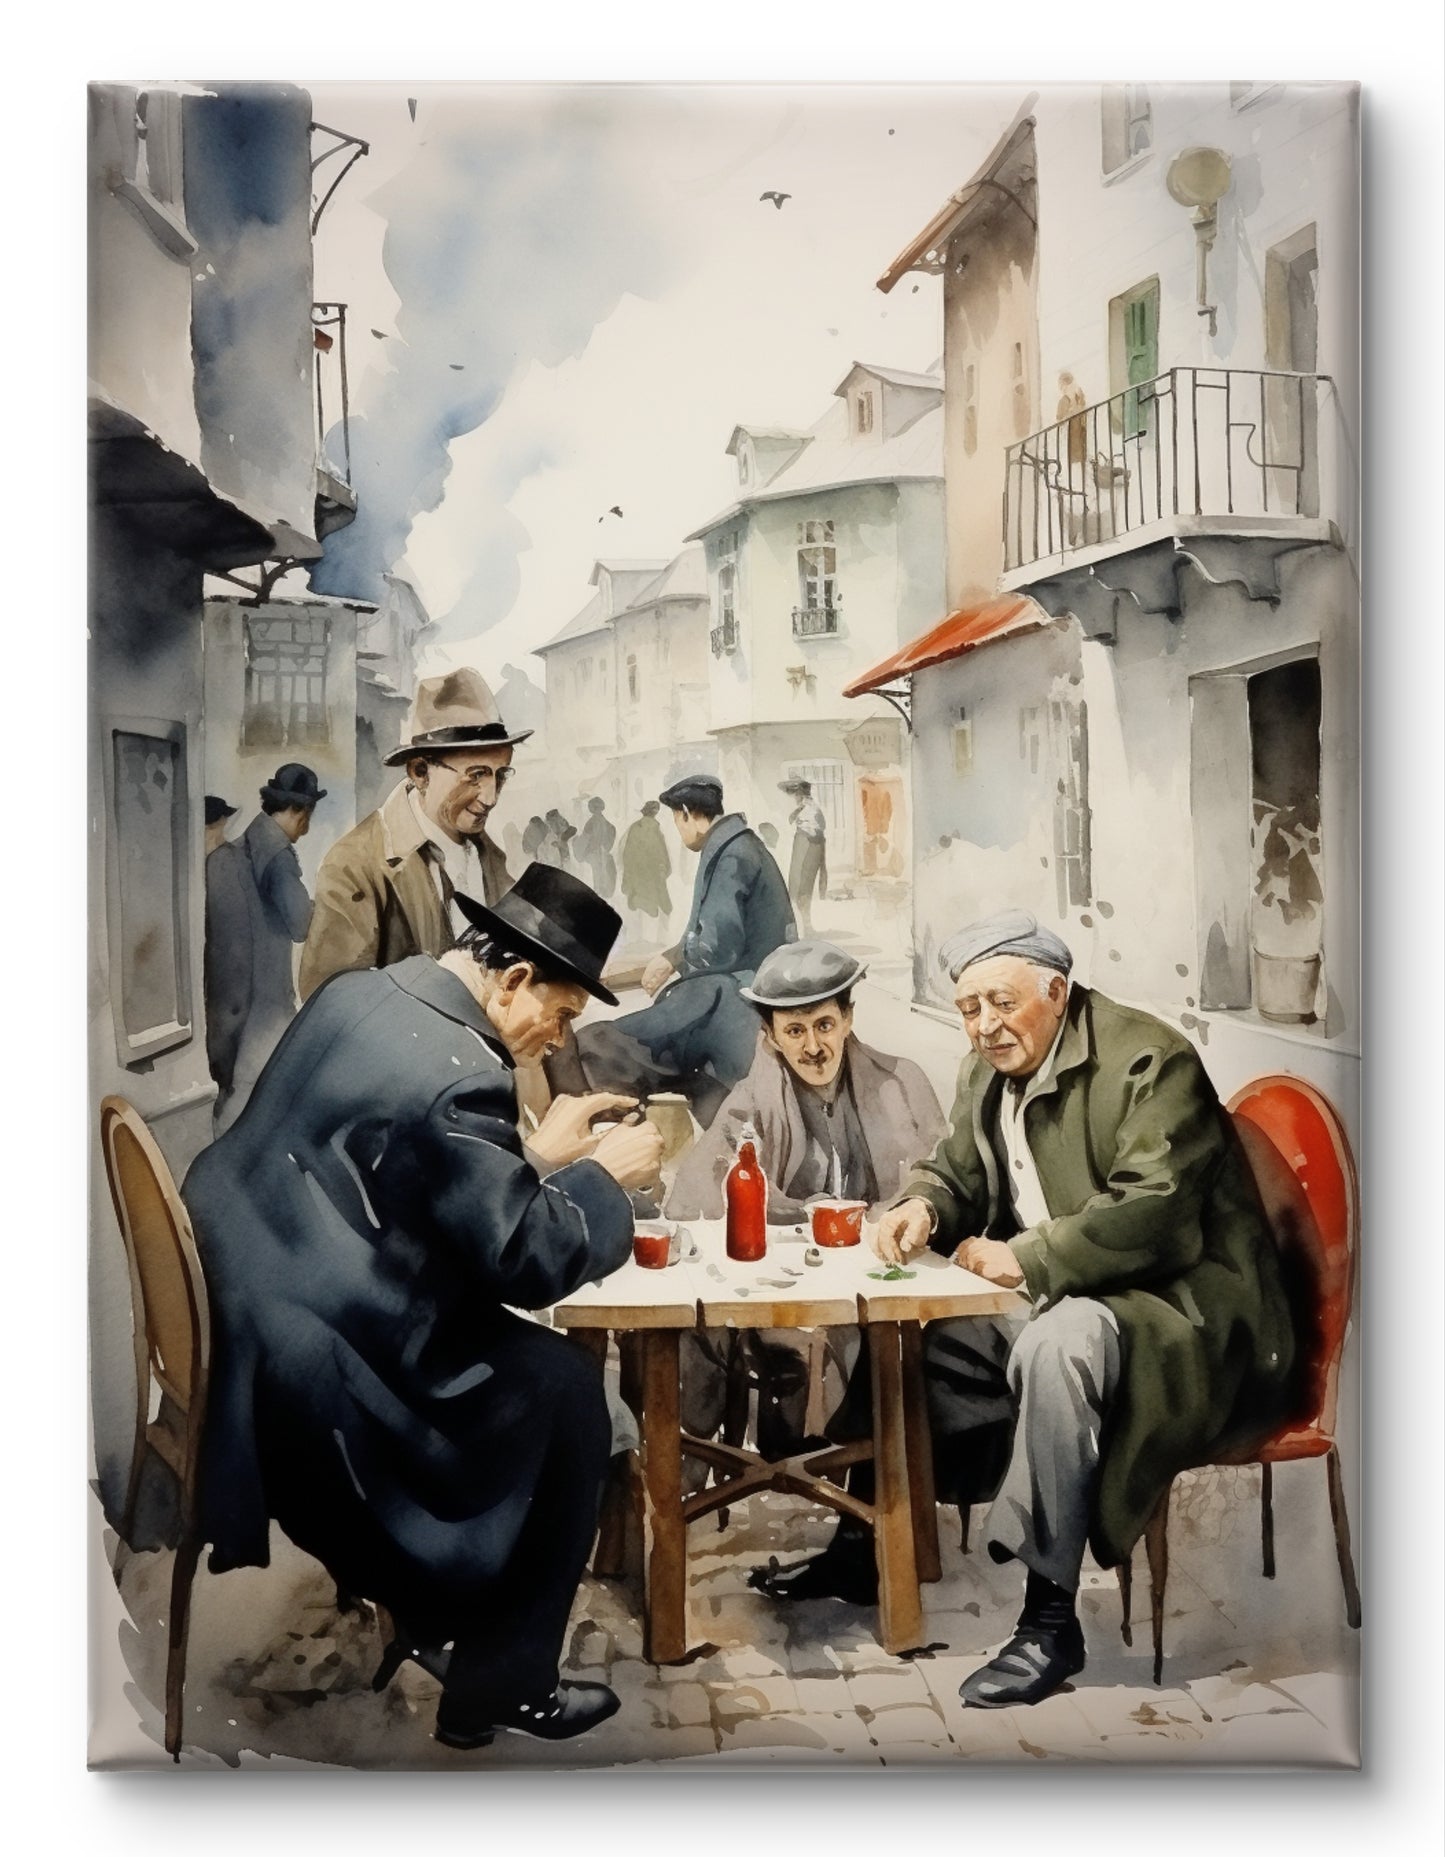 Gambling on the Streets Painting Istanbul Turkey